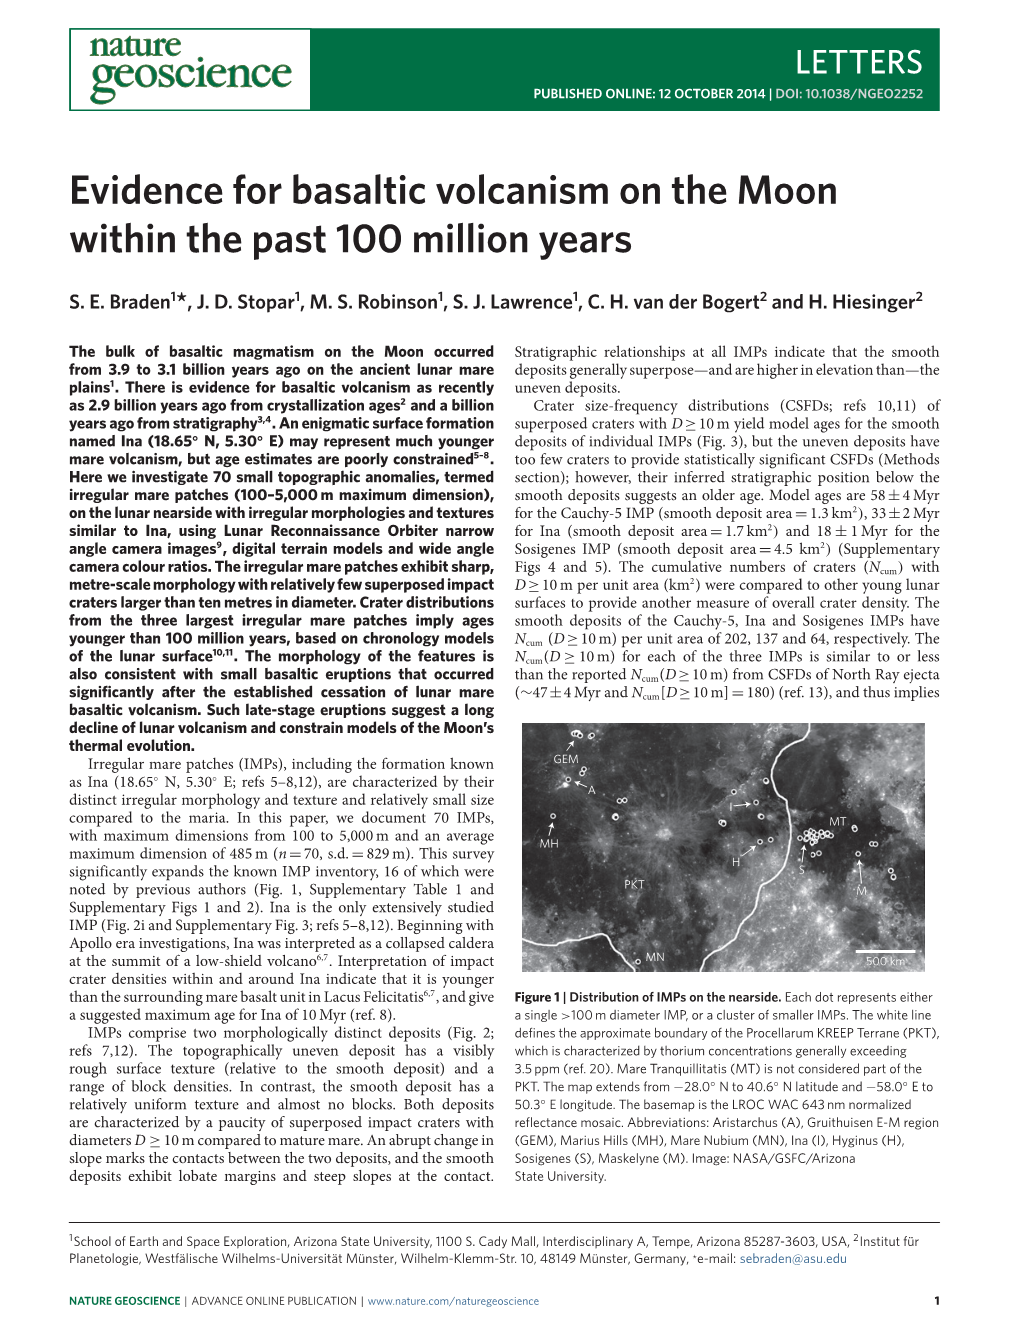 Evidence for Basaltic Volcanism on the Moon Within the Past 100 Million Years